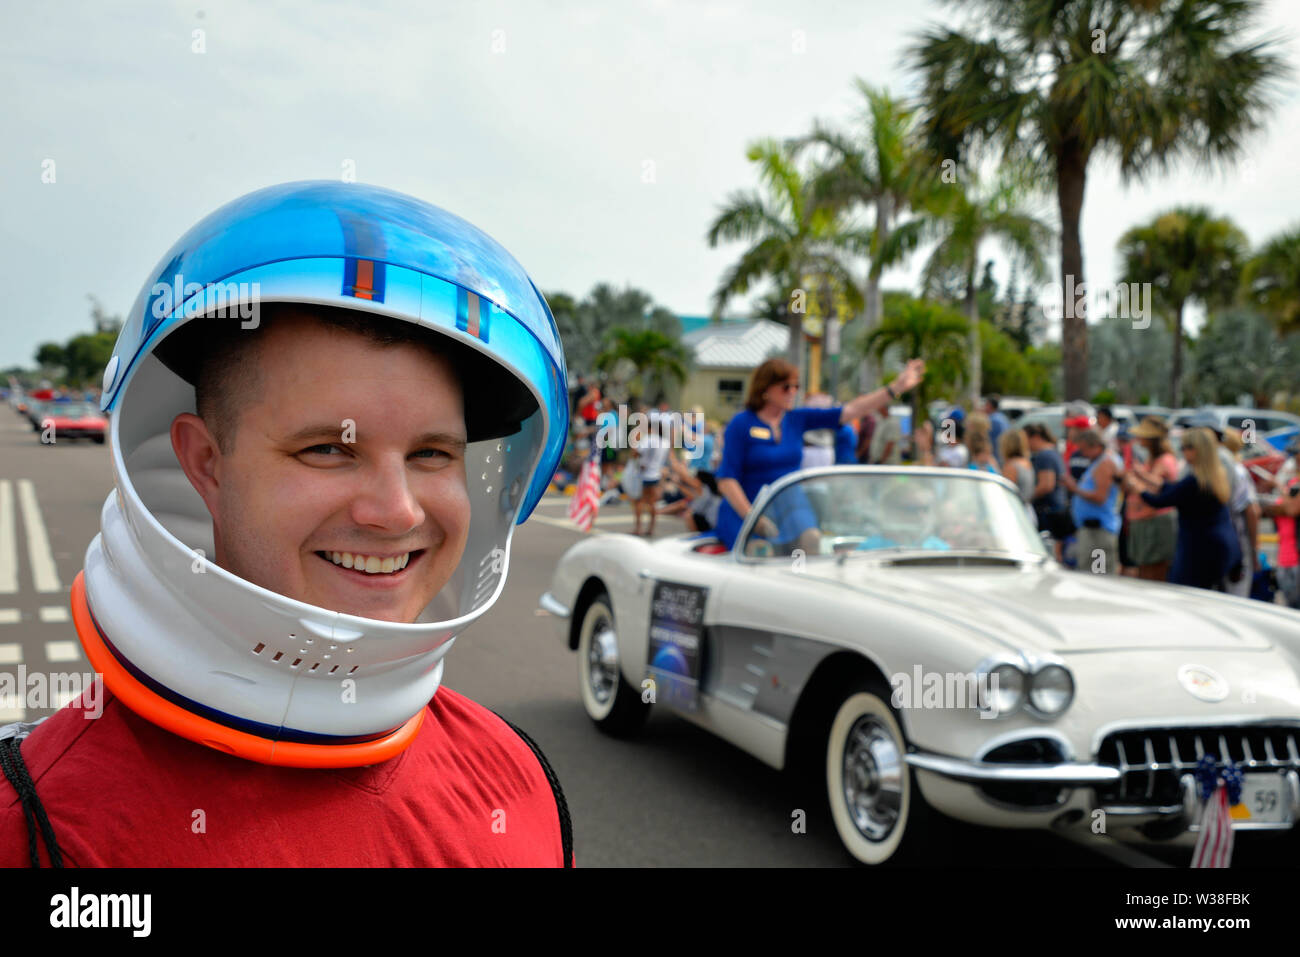 Cocoa Beach, Florida, USA. July 13, 2019. See our heroes as they ride through the City of Cocoa Beach in convertible Corvettes and witness the future of technology and innovation throughout the space industry! Former Apollo 15 Astronaut Al Worden with Space Shuttle Astronauts recreate the historic “Astronaut Corvette parade of the 60's.” Photo Credit: Julian Leek/Alamy Live News Stock Photo